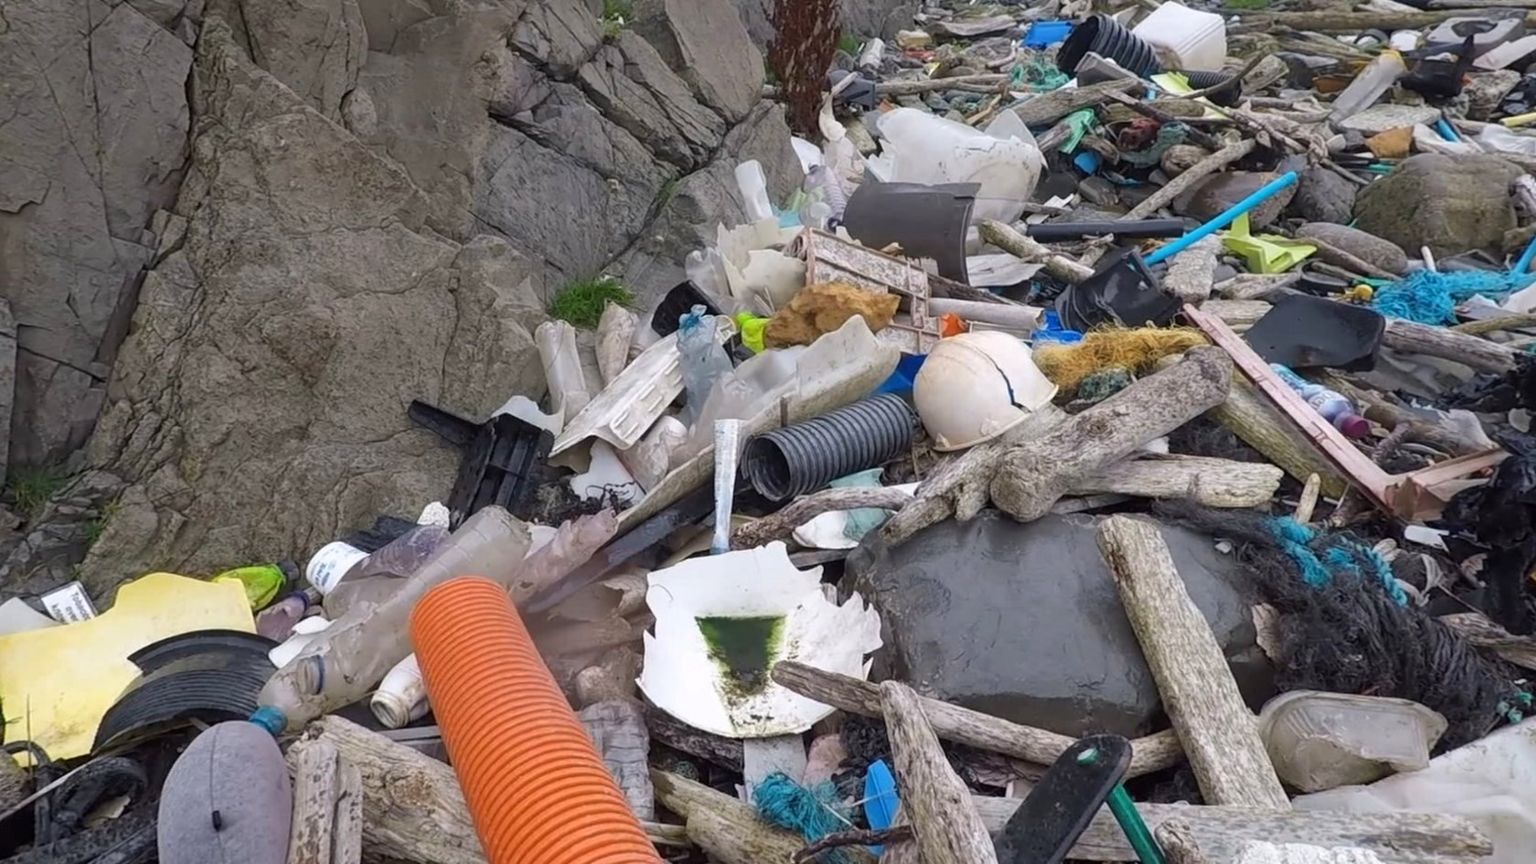 Plastics and other rubbish on beach